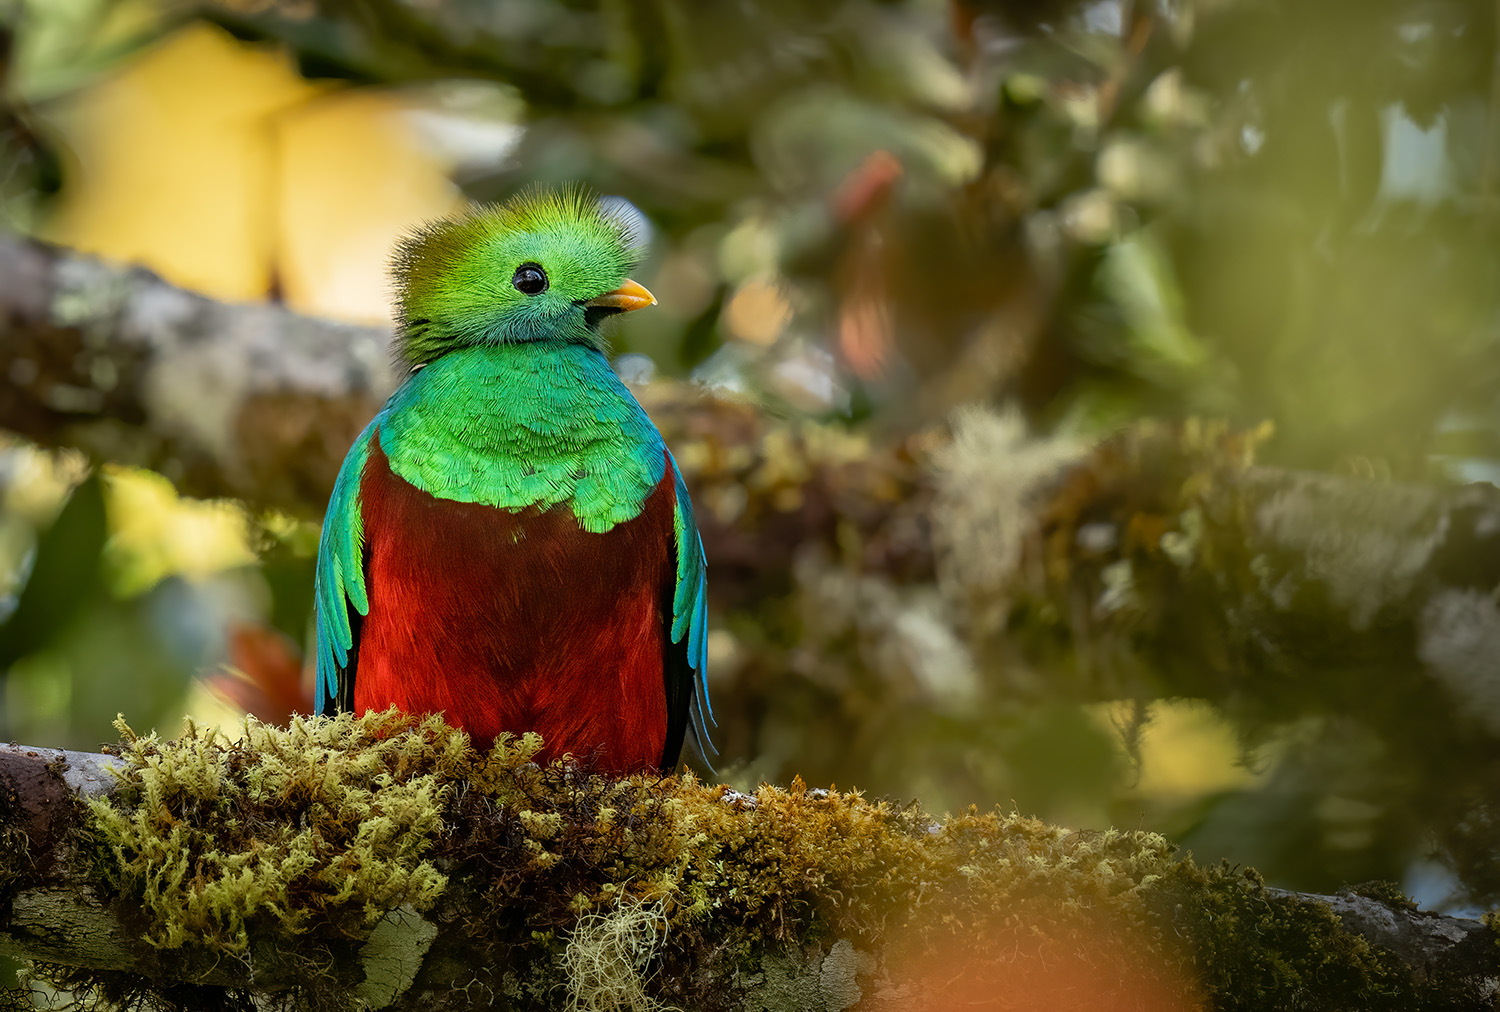 Costa Rica Cloud Forest / Tropical Wildlife Photography Workshop